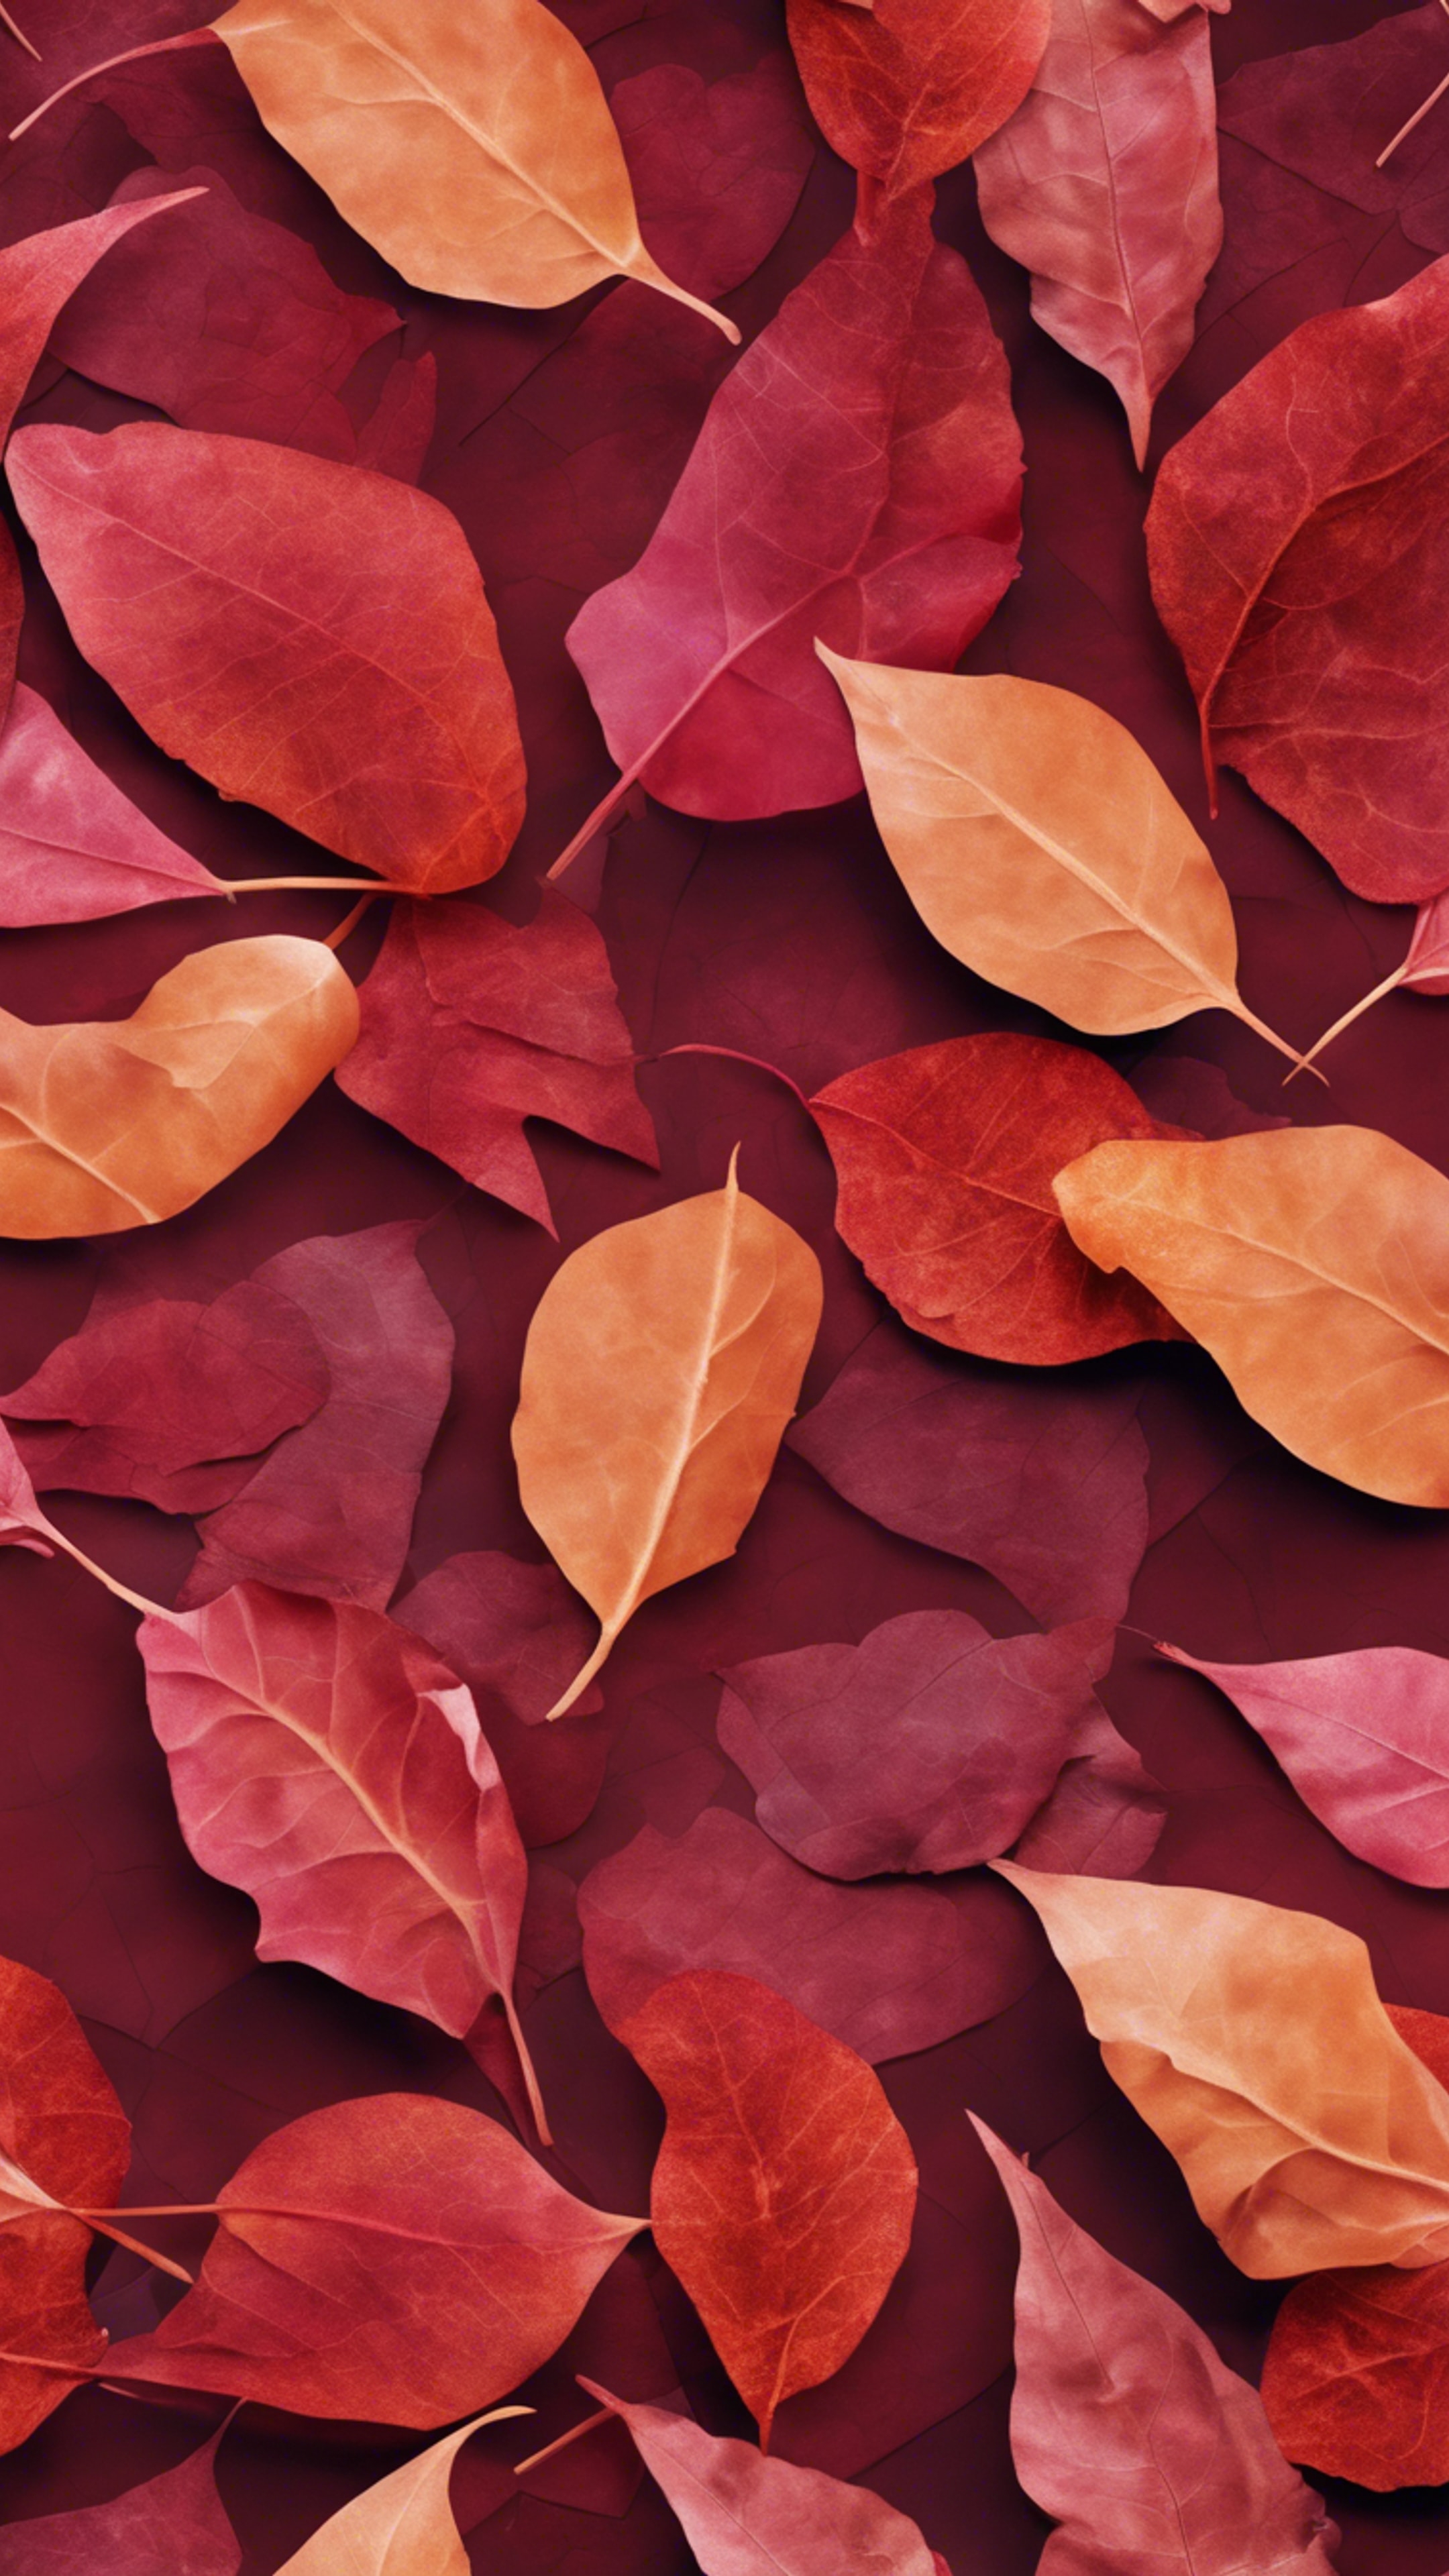 An abstract, tessellating pattern of fiery ruby and russet shapes, reminiscent of falling leaves in autumn. Tapeta[1bca3c6cf9b9400393d6]